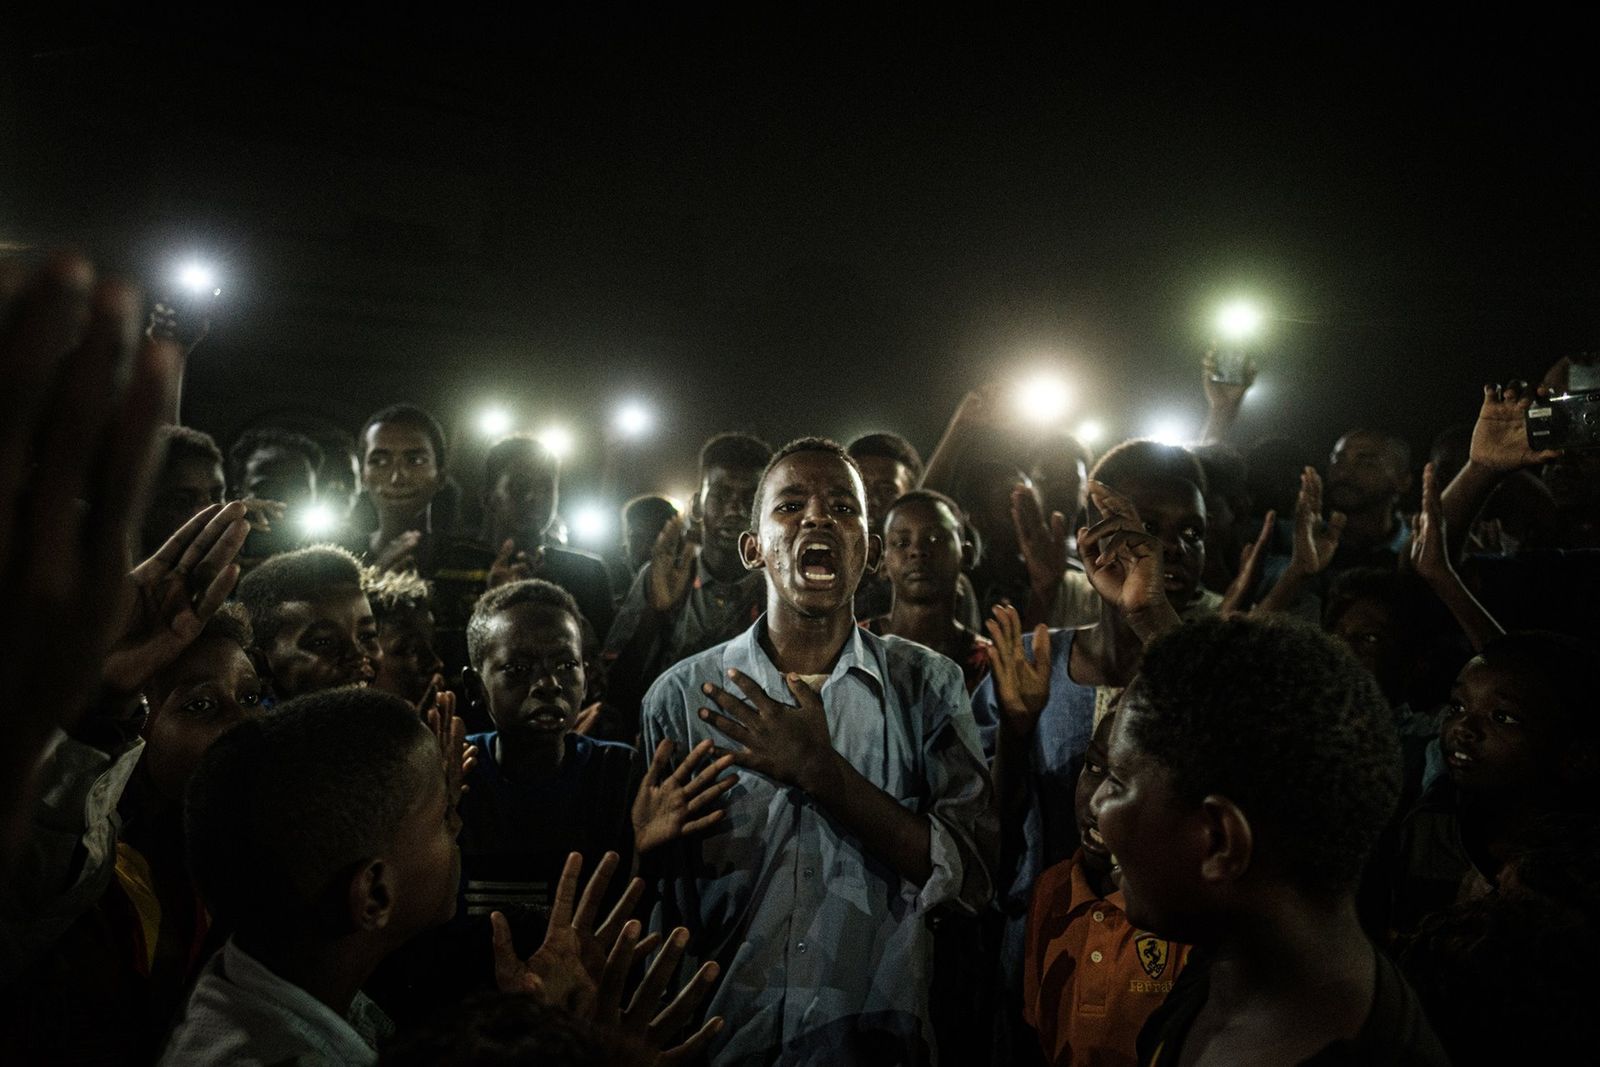 See all the World Press Photo Awarded Photos and Stories